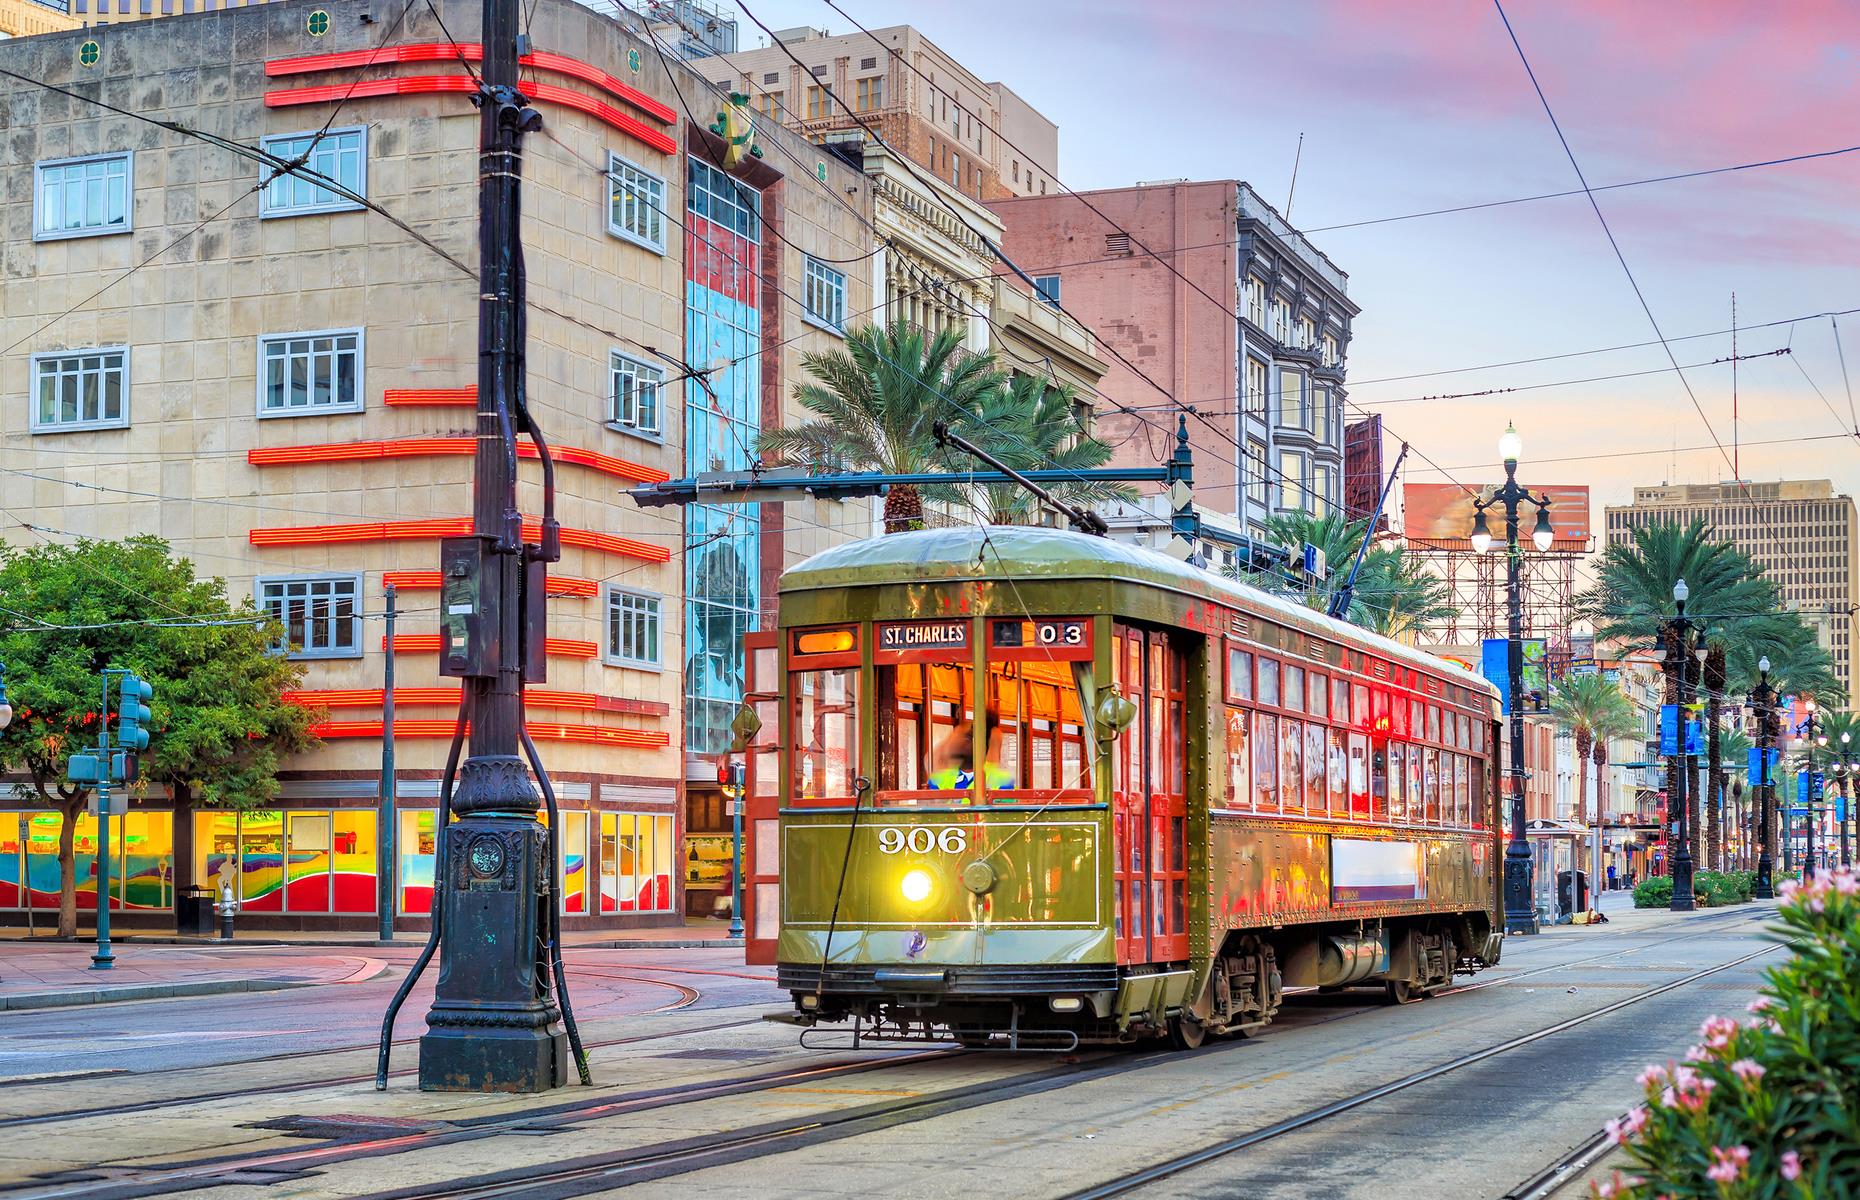 <p>Gumbo, beignets and the bayou: the food and landscapes of the Deep South almost ooze through the screen in Disney’s depiction of 1920s New Orleans in <em>The Princess and the Frog</em>. The plot takes Tiana – Disney’s first black heroine – on the streetcars along New Orleans’ historic St Charles Avenue, past jazz bands in the French Quarter and on the Mississippi onboard the Steamboat Natchez, while her happy ending takes place in the city's St Louis Cathedral.</p>